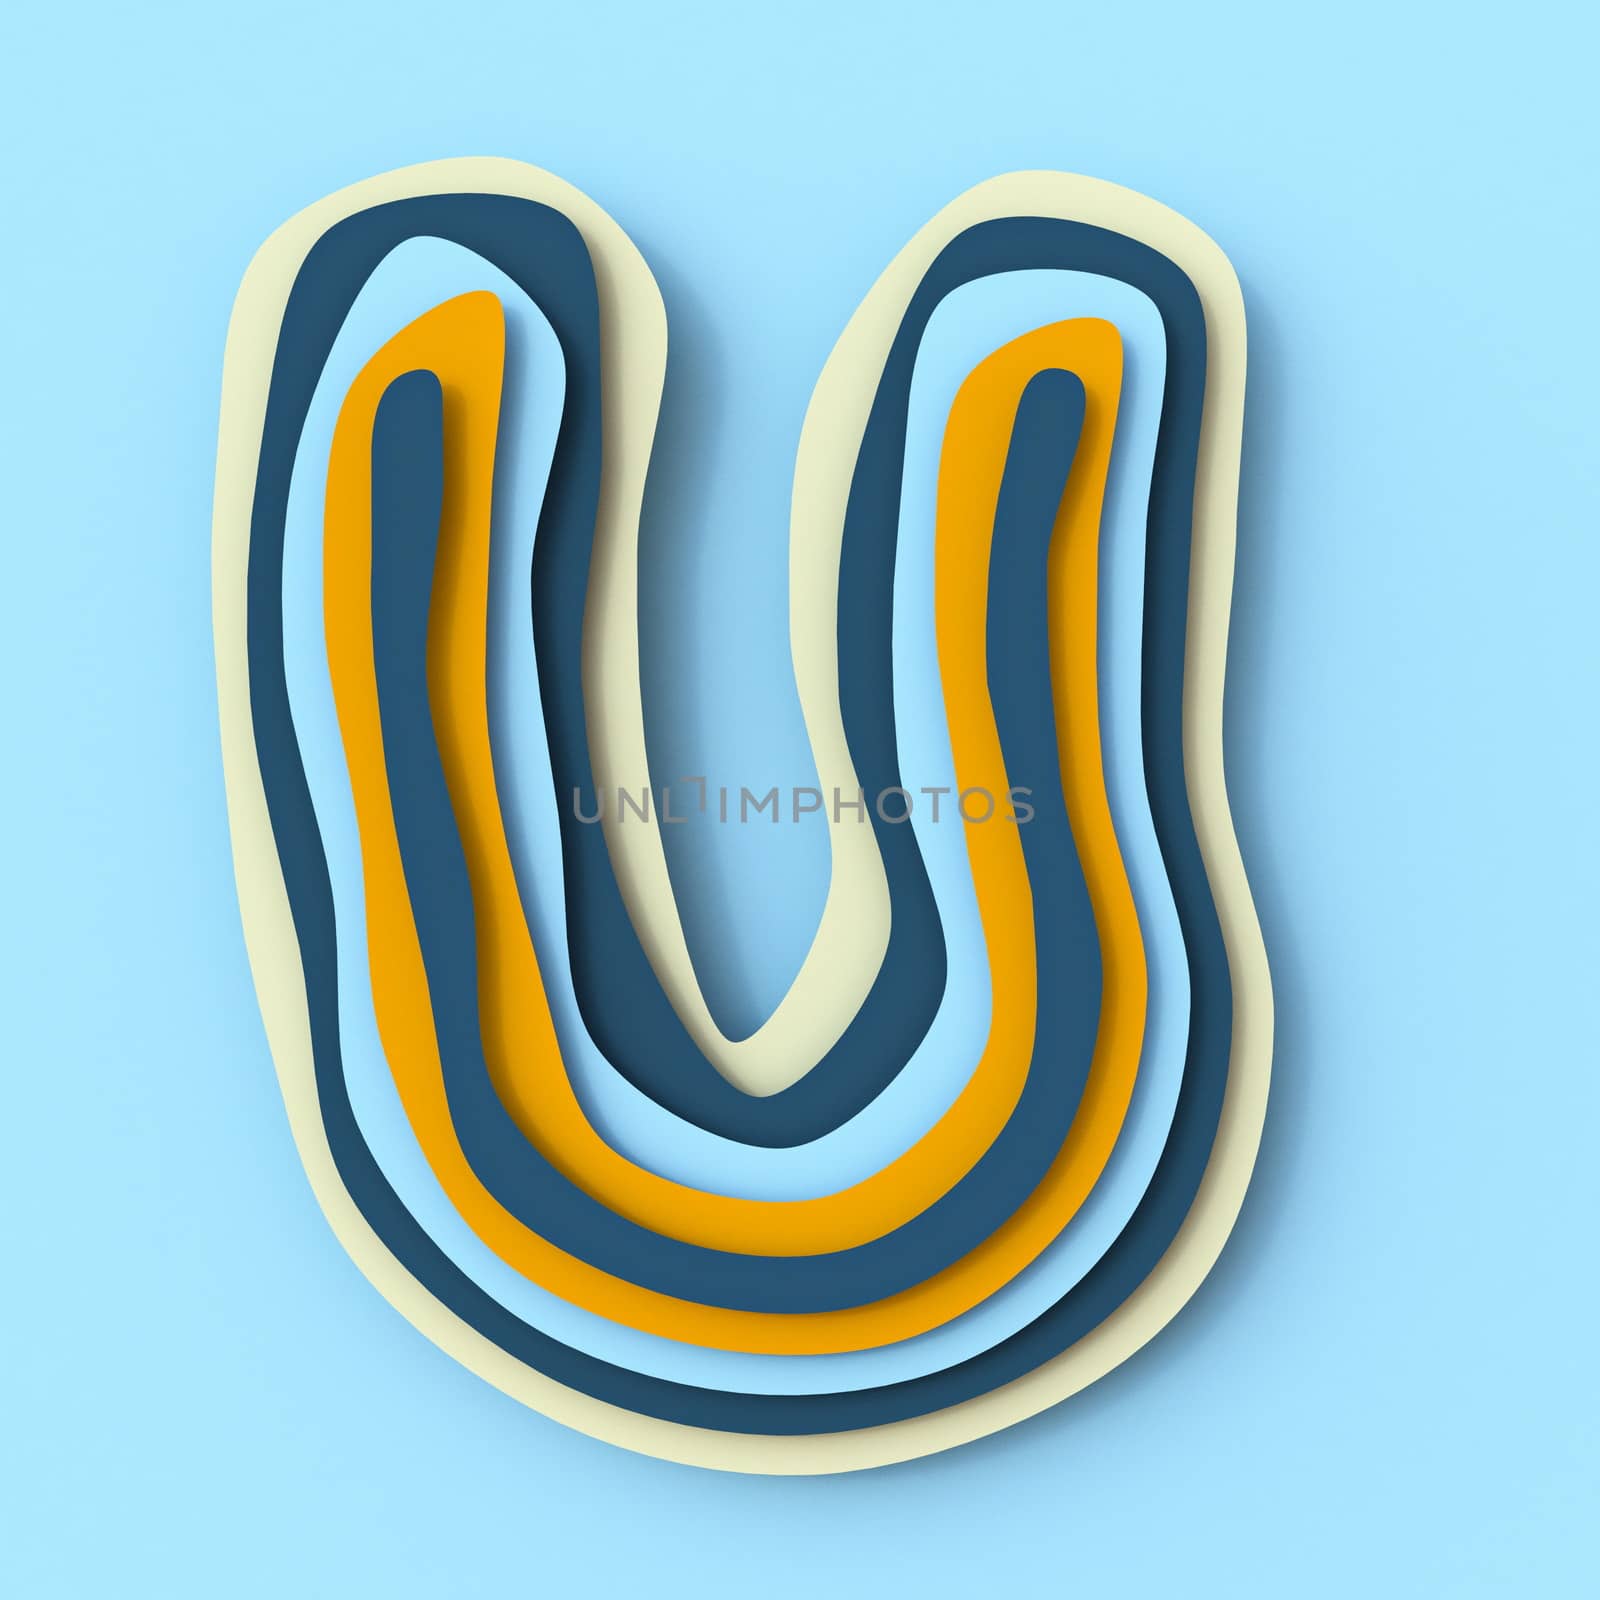 Colorful paper layers font Letter U 3D render illustration isolated on blue background